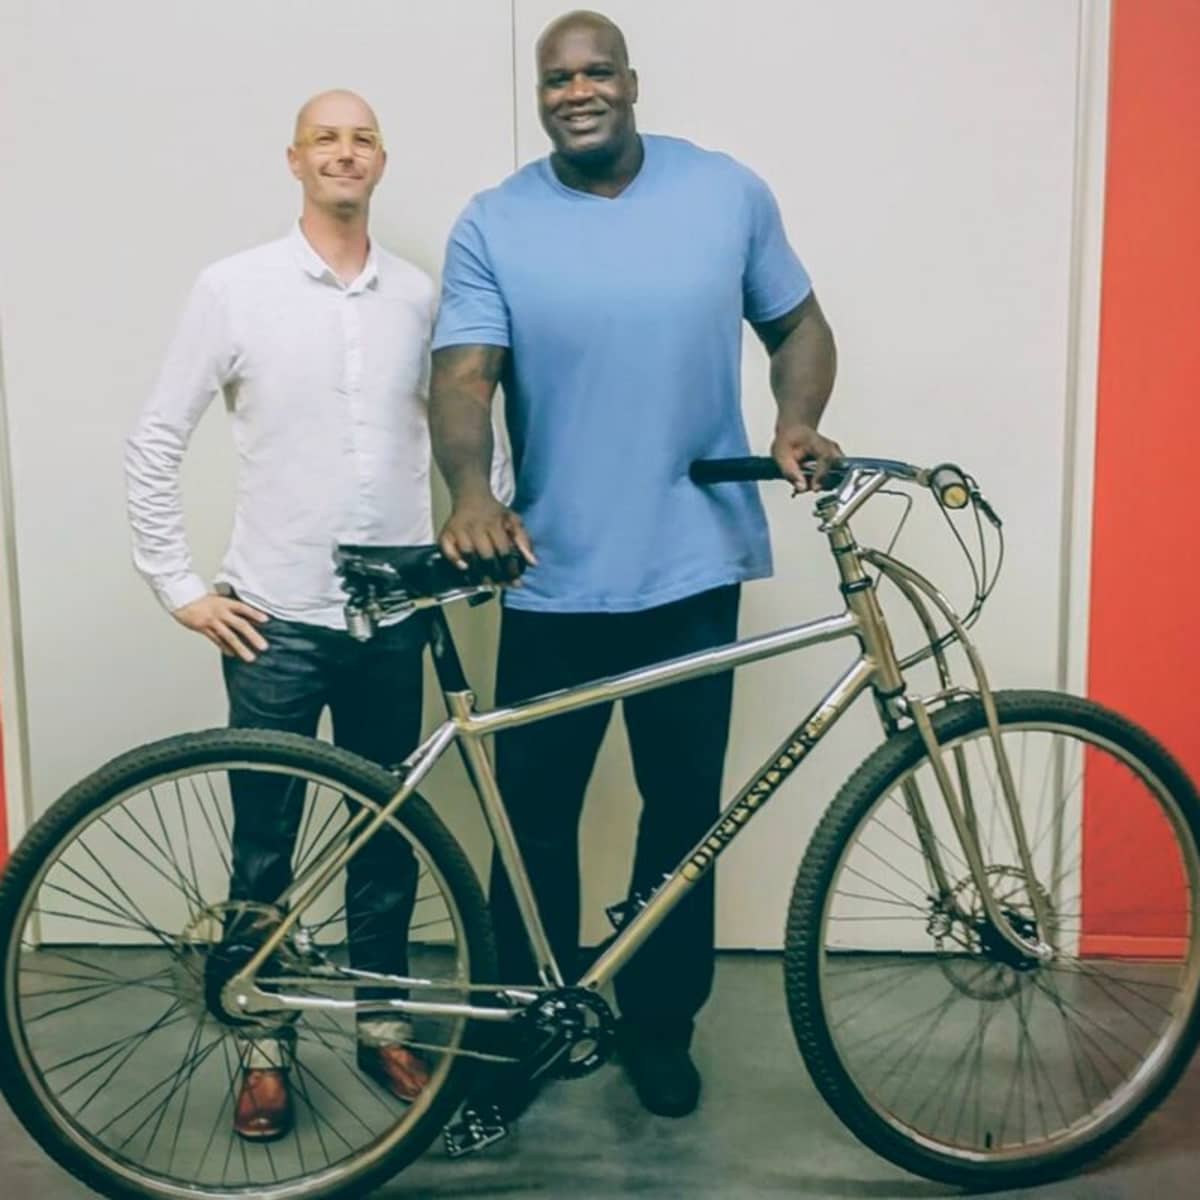 NBA Icon Shaquille O'Neal Makes Huge Custom Bicycle Look Tiny